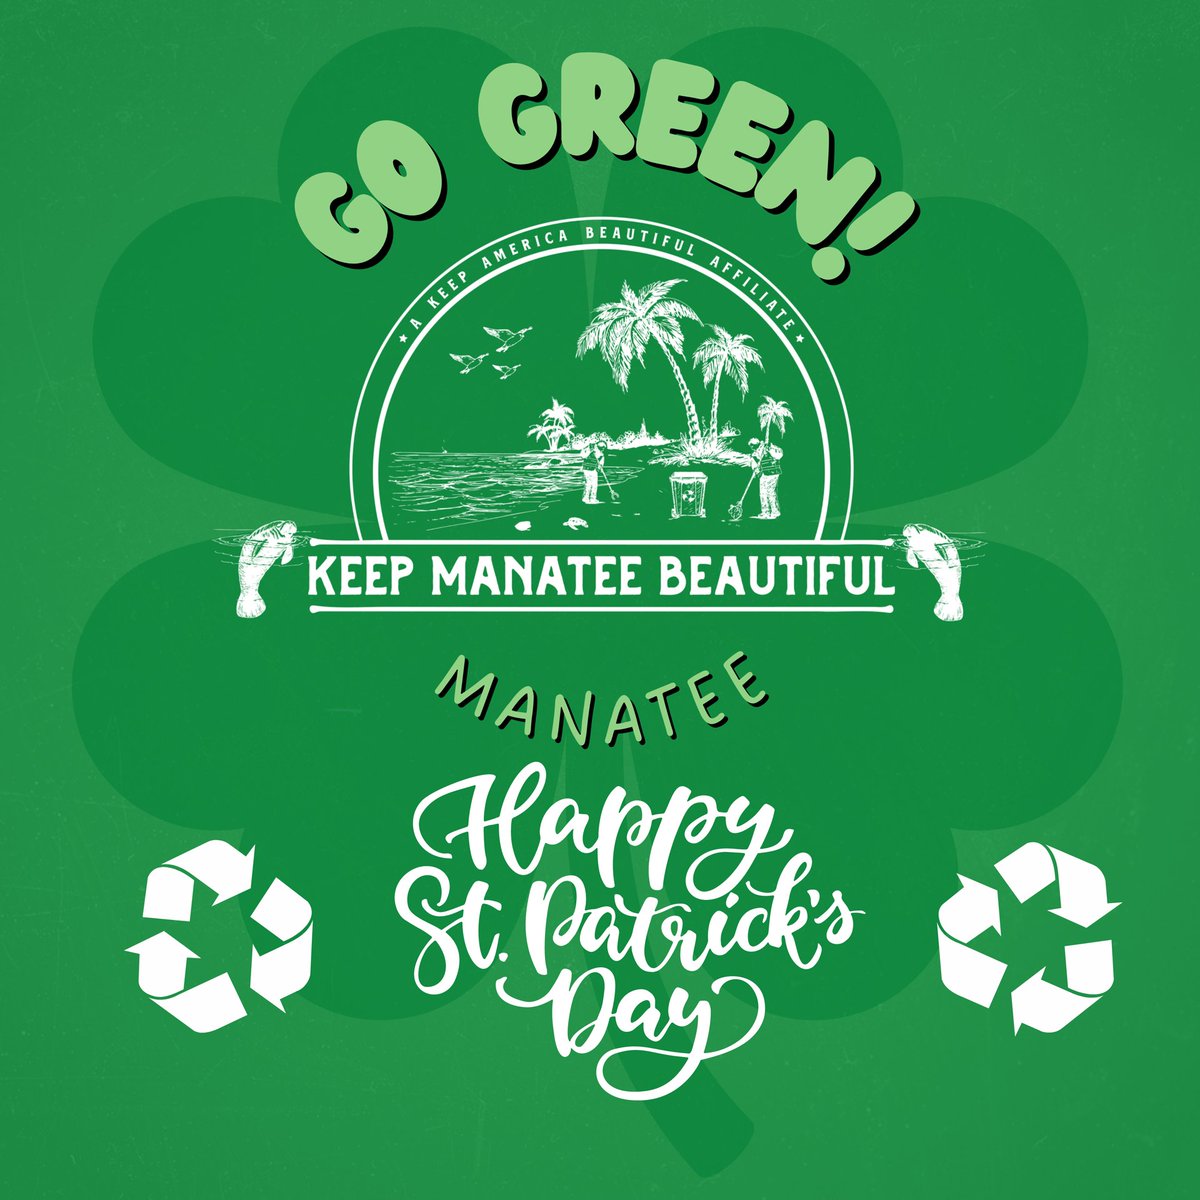 'Join us in going green this St. Patrick's Day by recycling and composting! Let's keep our planet healthy and happy 🌿🌎 #StPatricksDay #EcoFriendlyCelebration #Recycling'